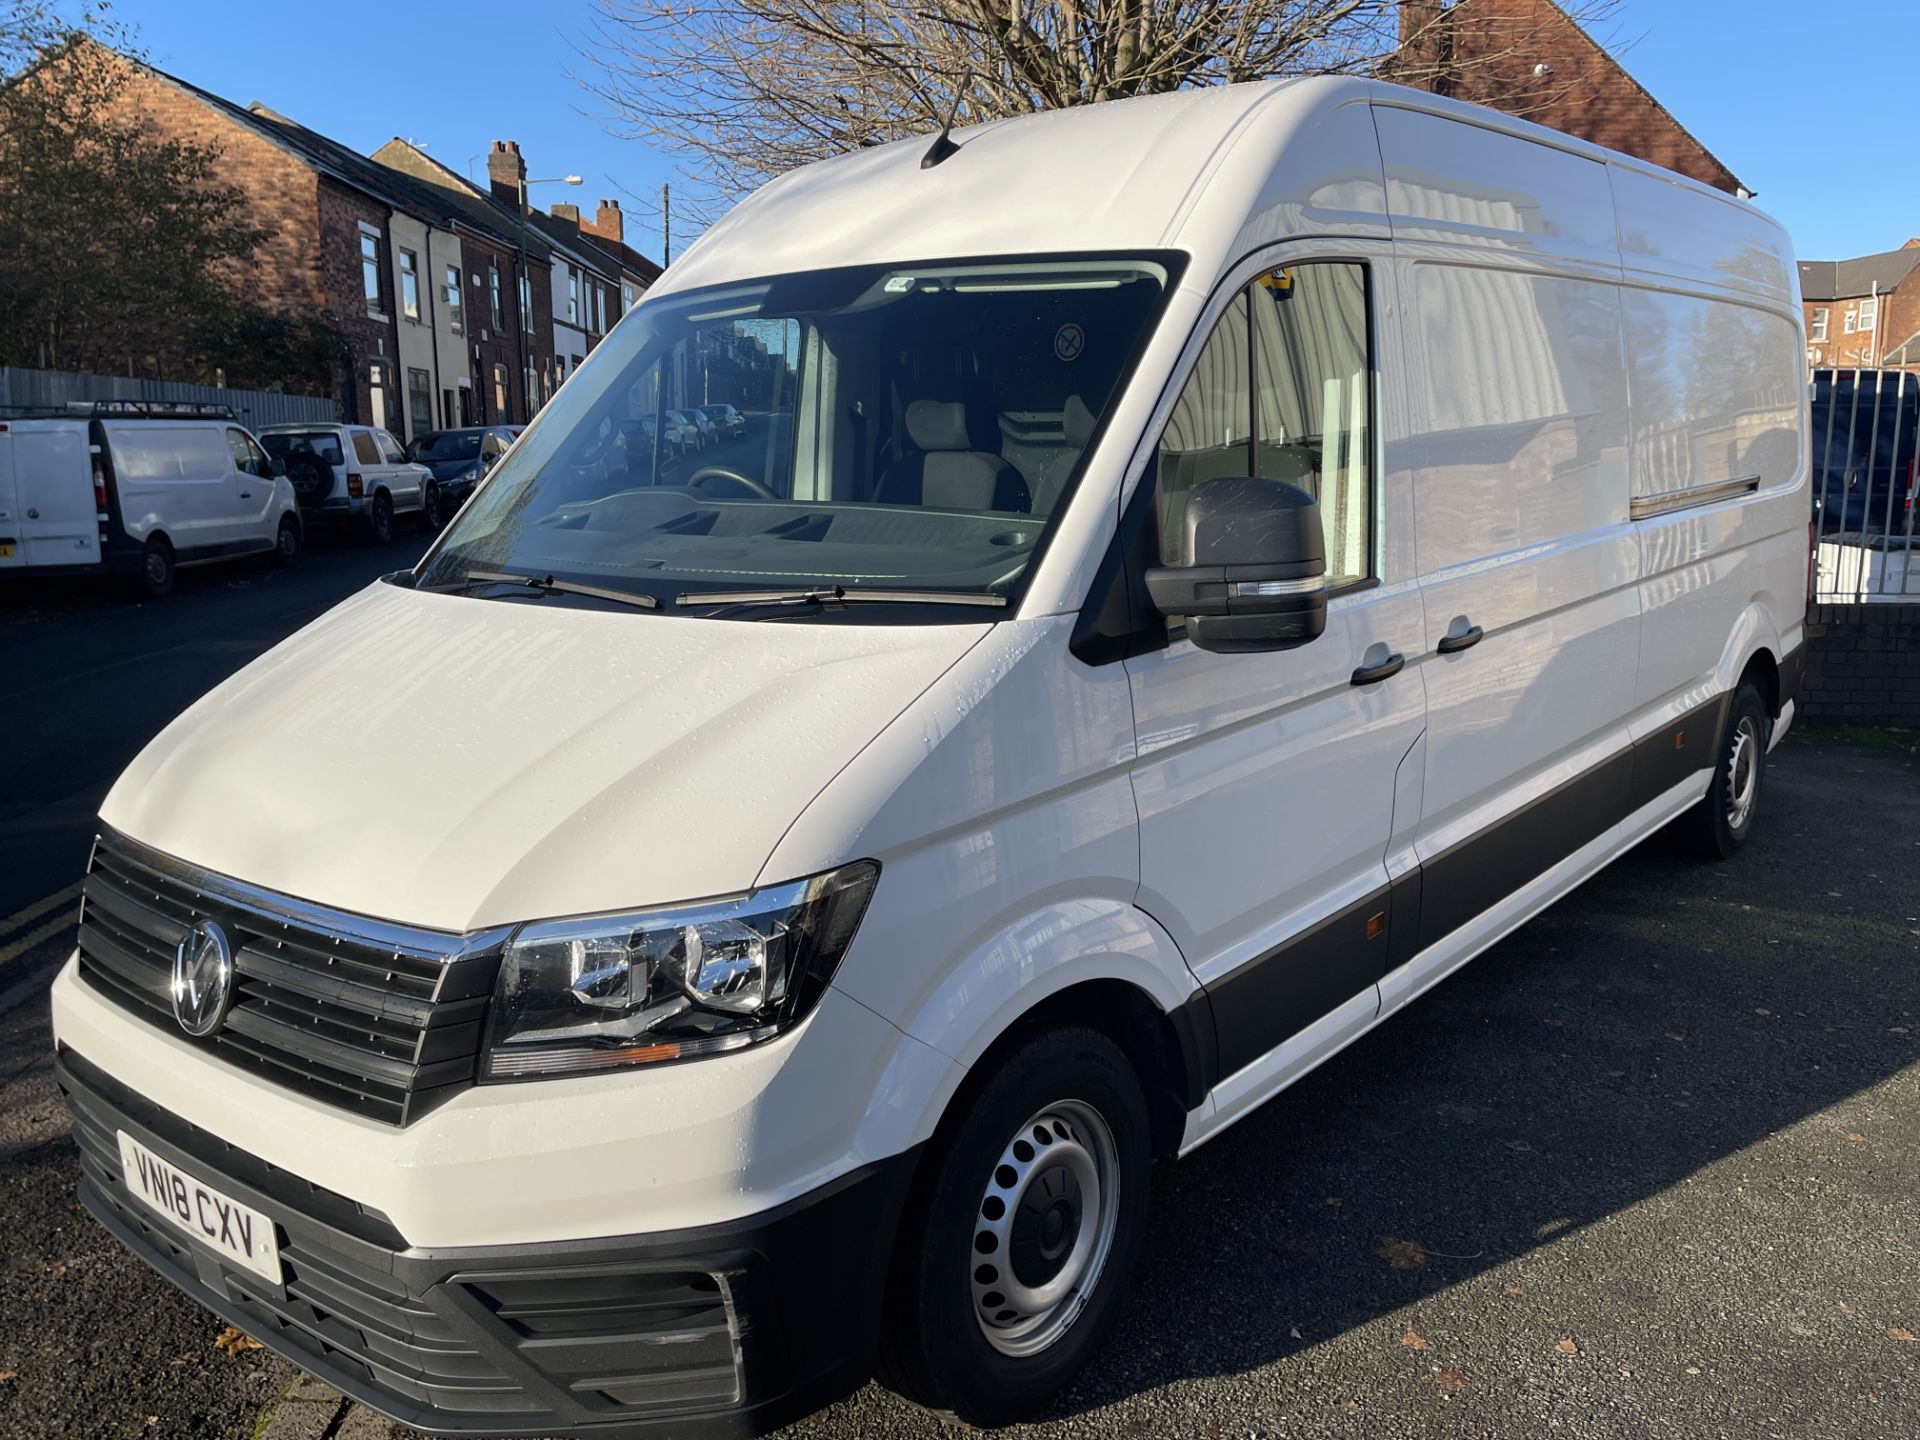 2018 - VW Crafter CR35 102PS Trend Line LWB TDI - Image 15 of 34